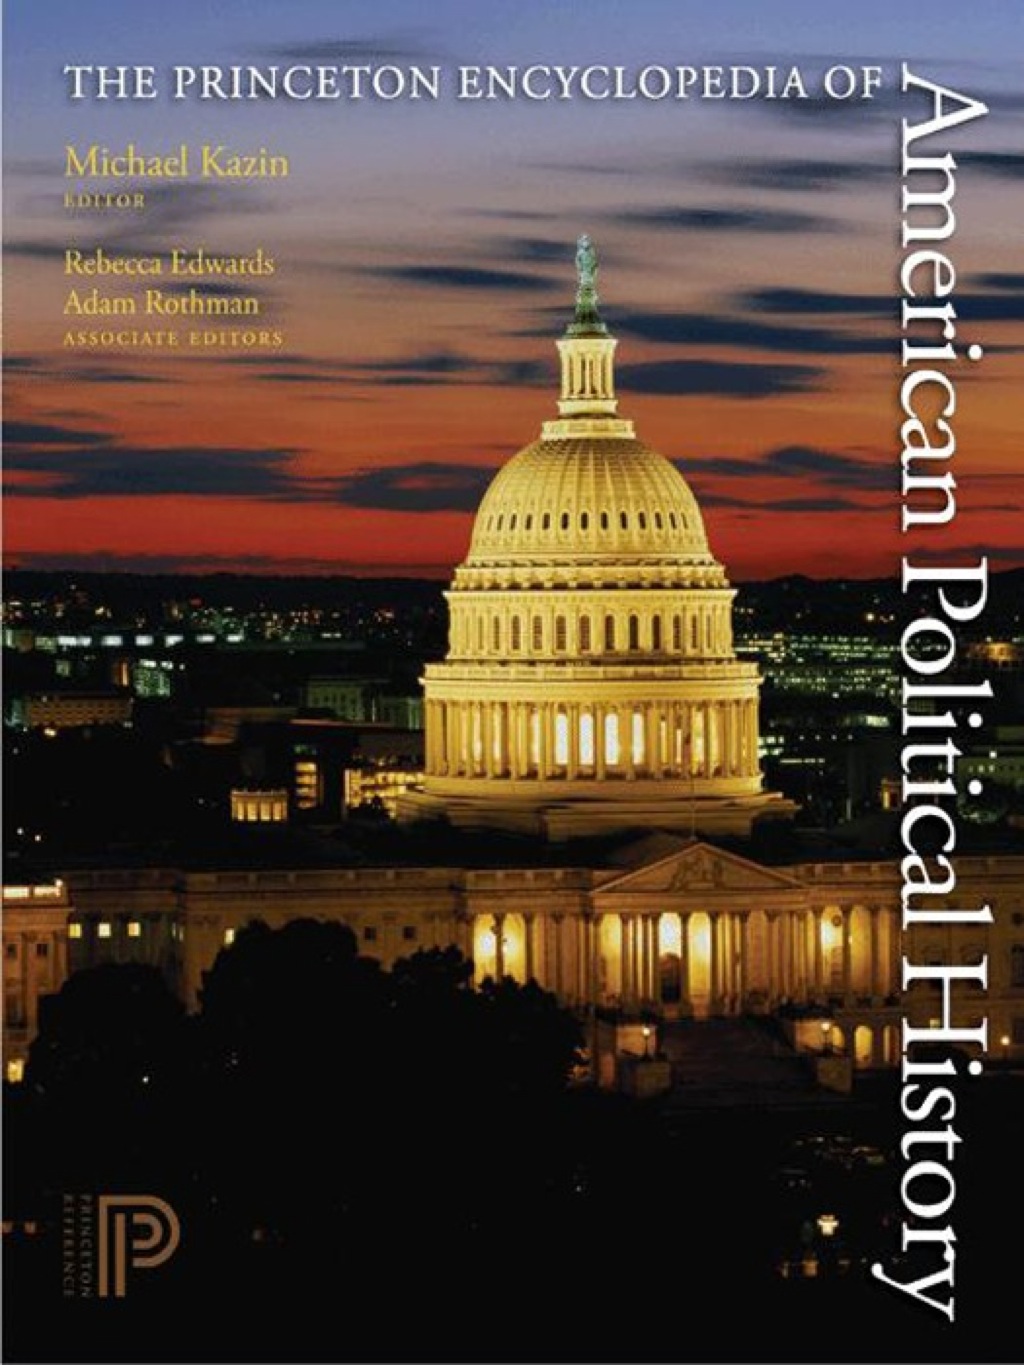 The Princeton Encyclopedia of American Political History. (Two volume set) (eBook Rental) - Author,